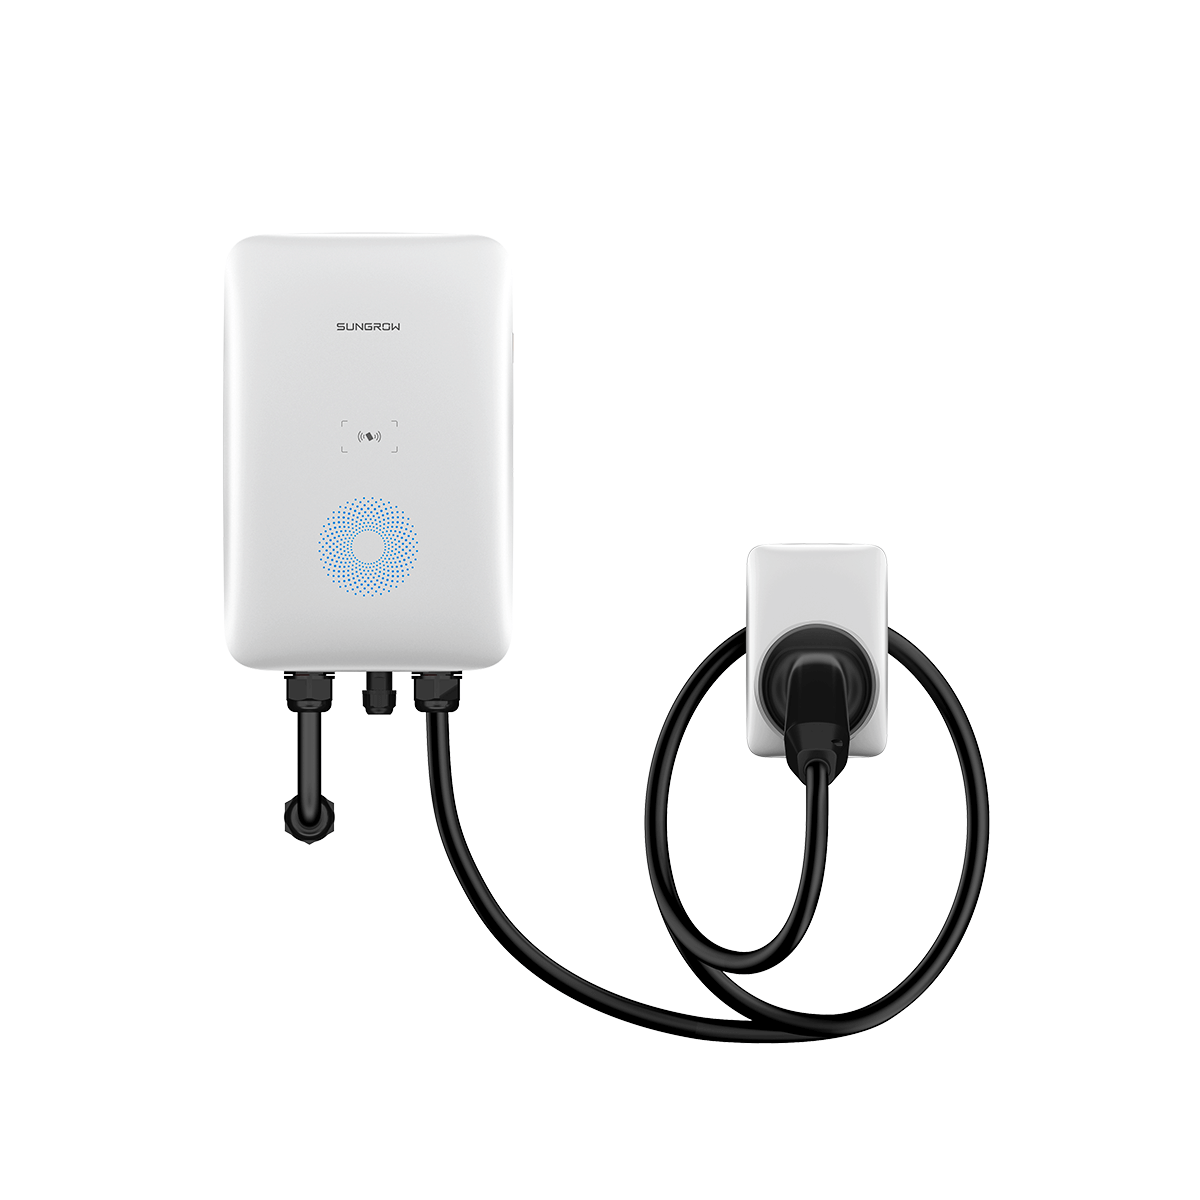 Sungrow 11 kW 1PH stand-alone charger